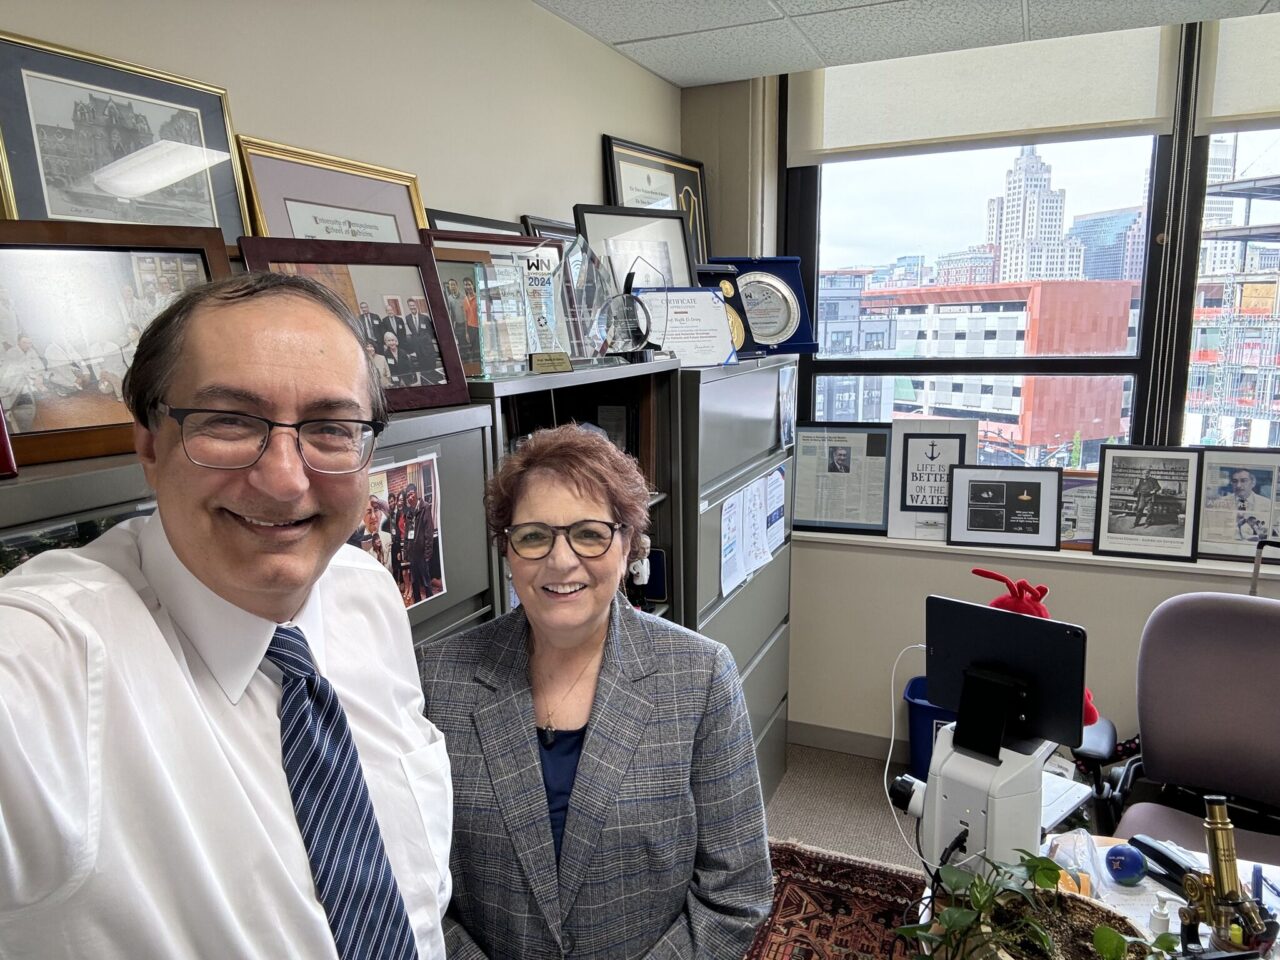 Wafik El-Deiry: Great to have a chance to spend time with Dr. Electra Paskett